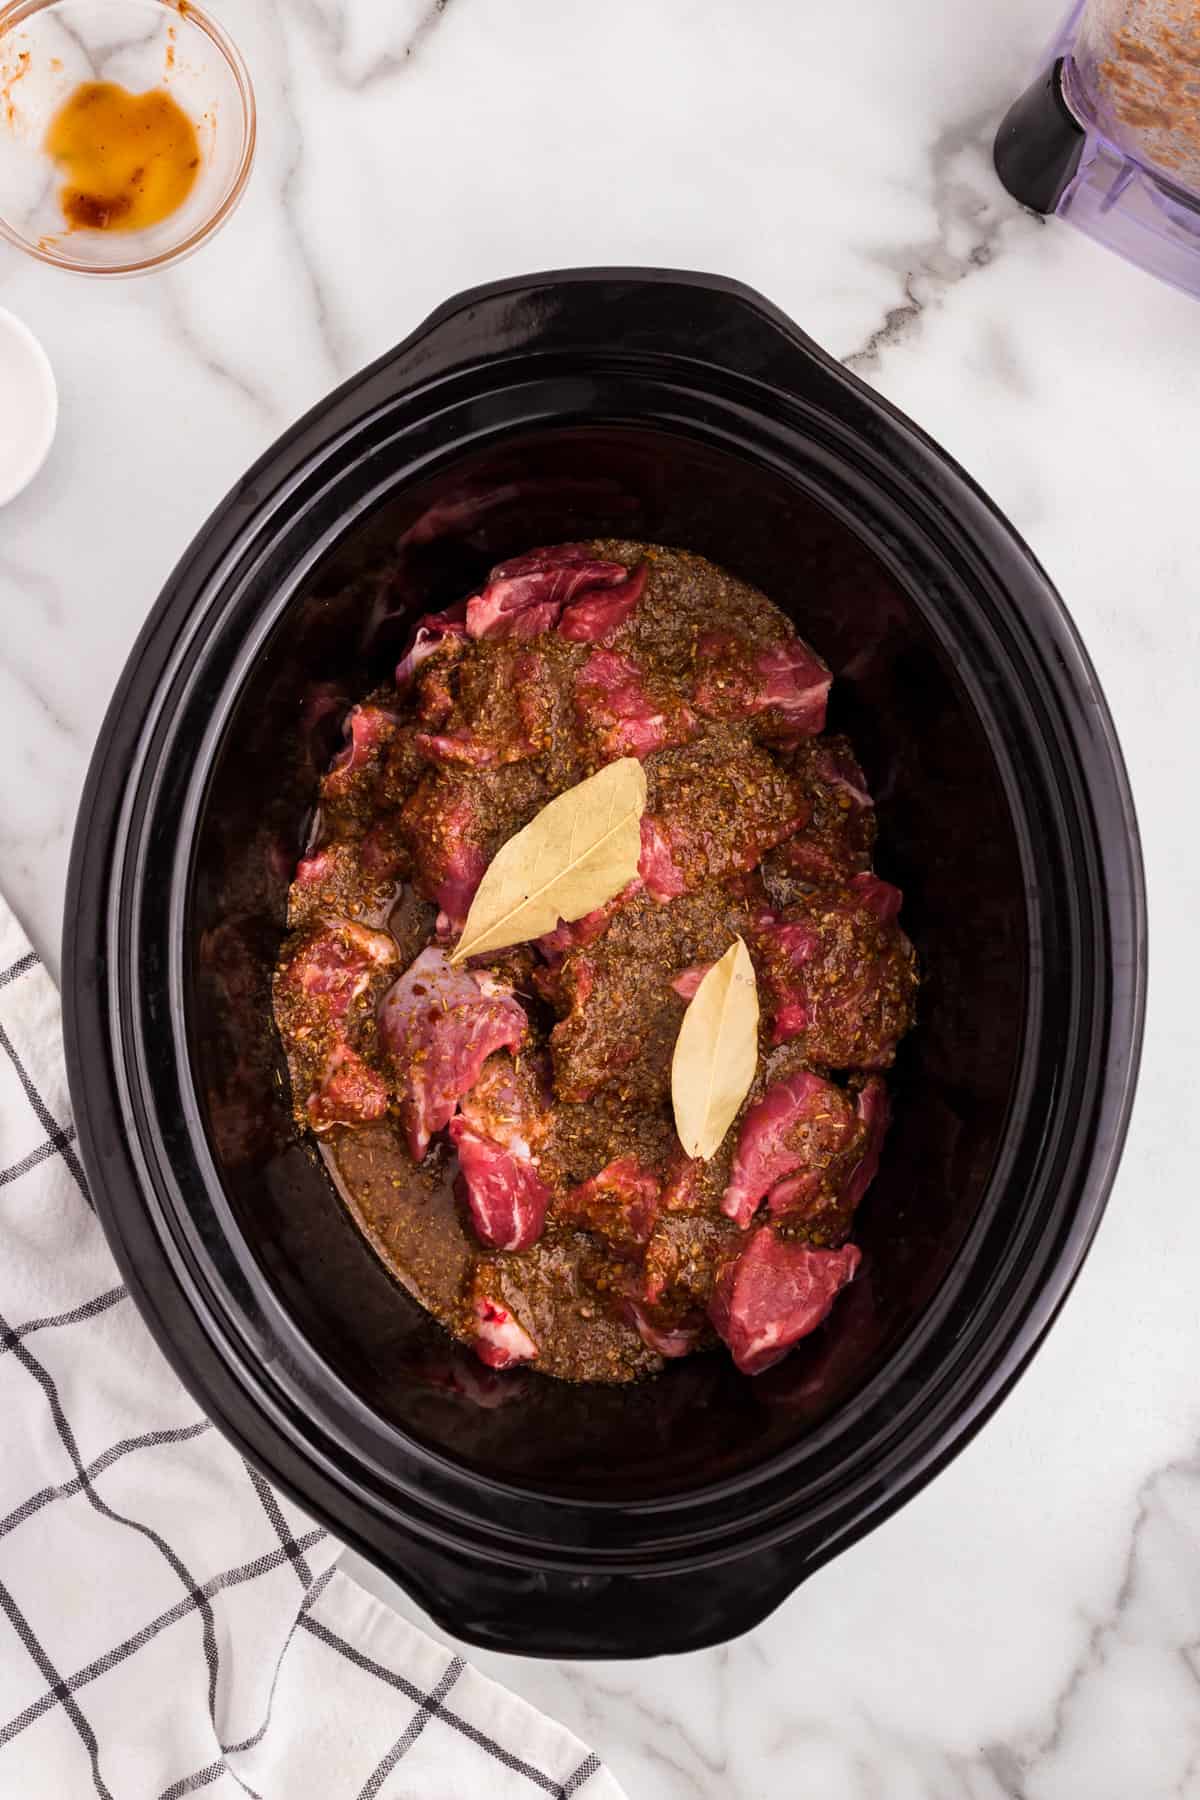 Topping Barbacoa Beef mixture with bay leaves in crock pot